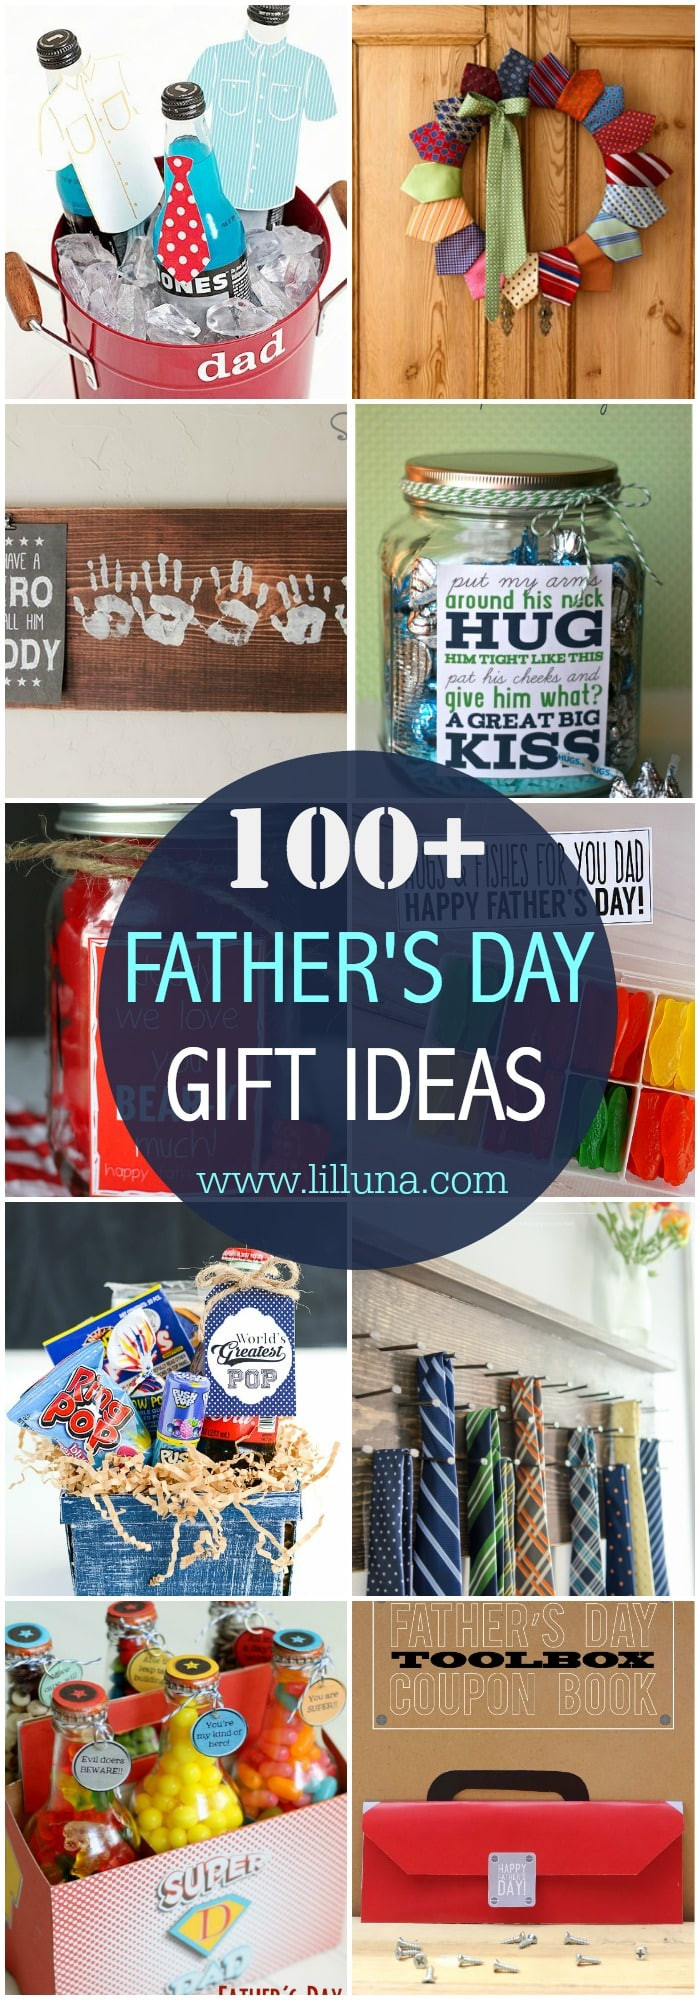 Fathers Day Gift Ideas Pinterest
 100 DIY Father s Day Gifts